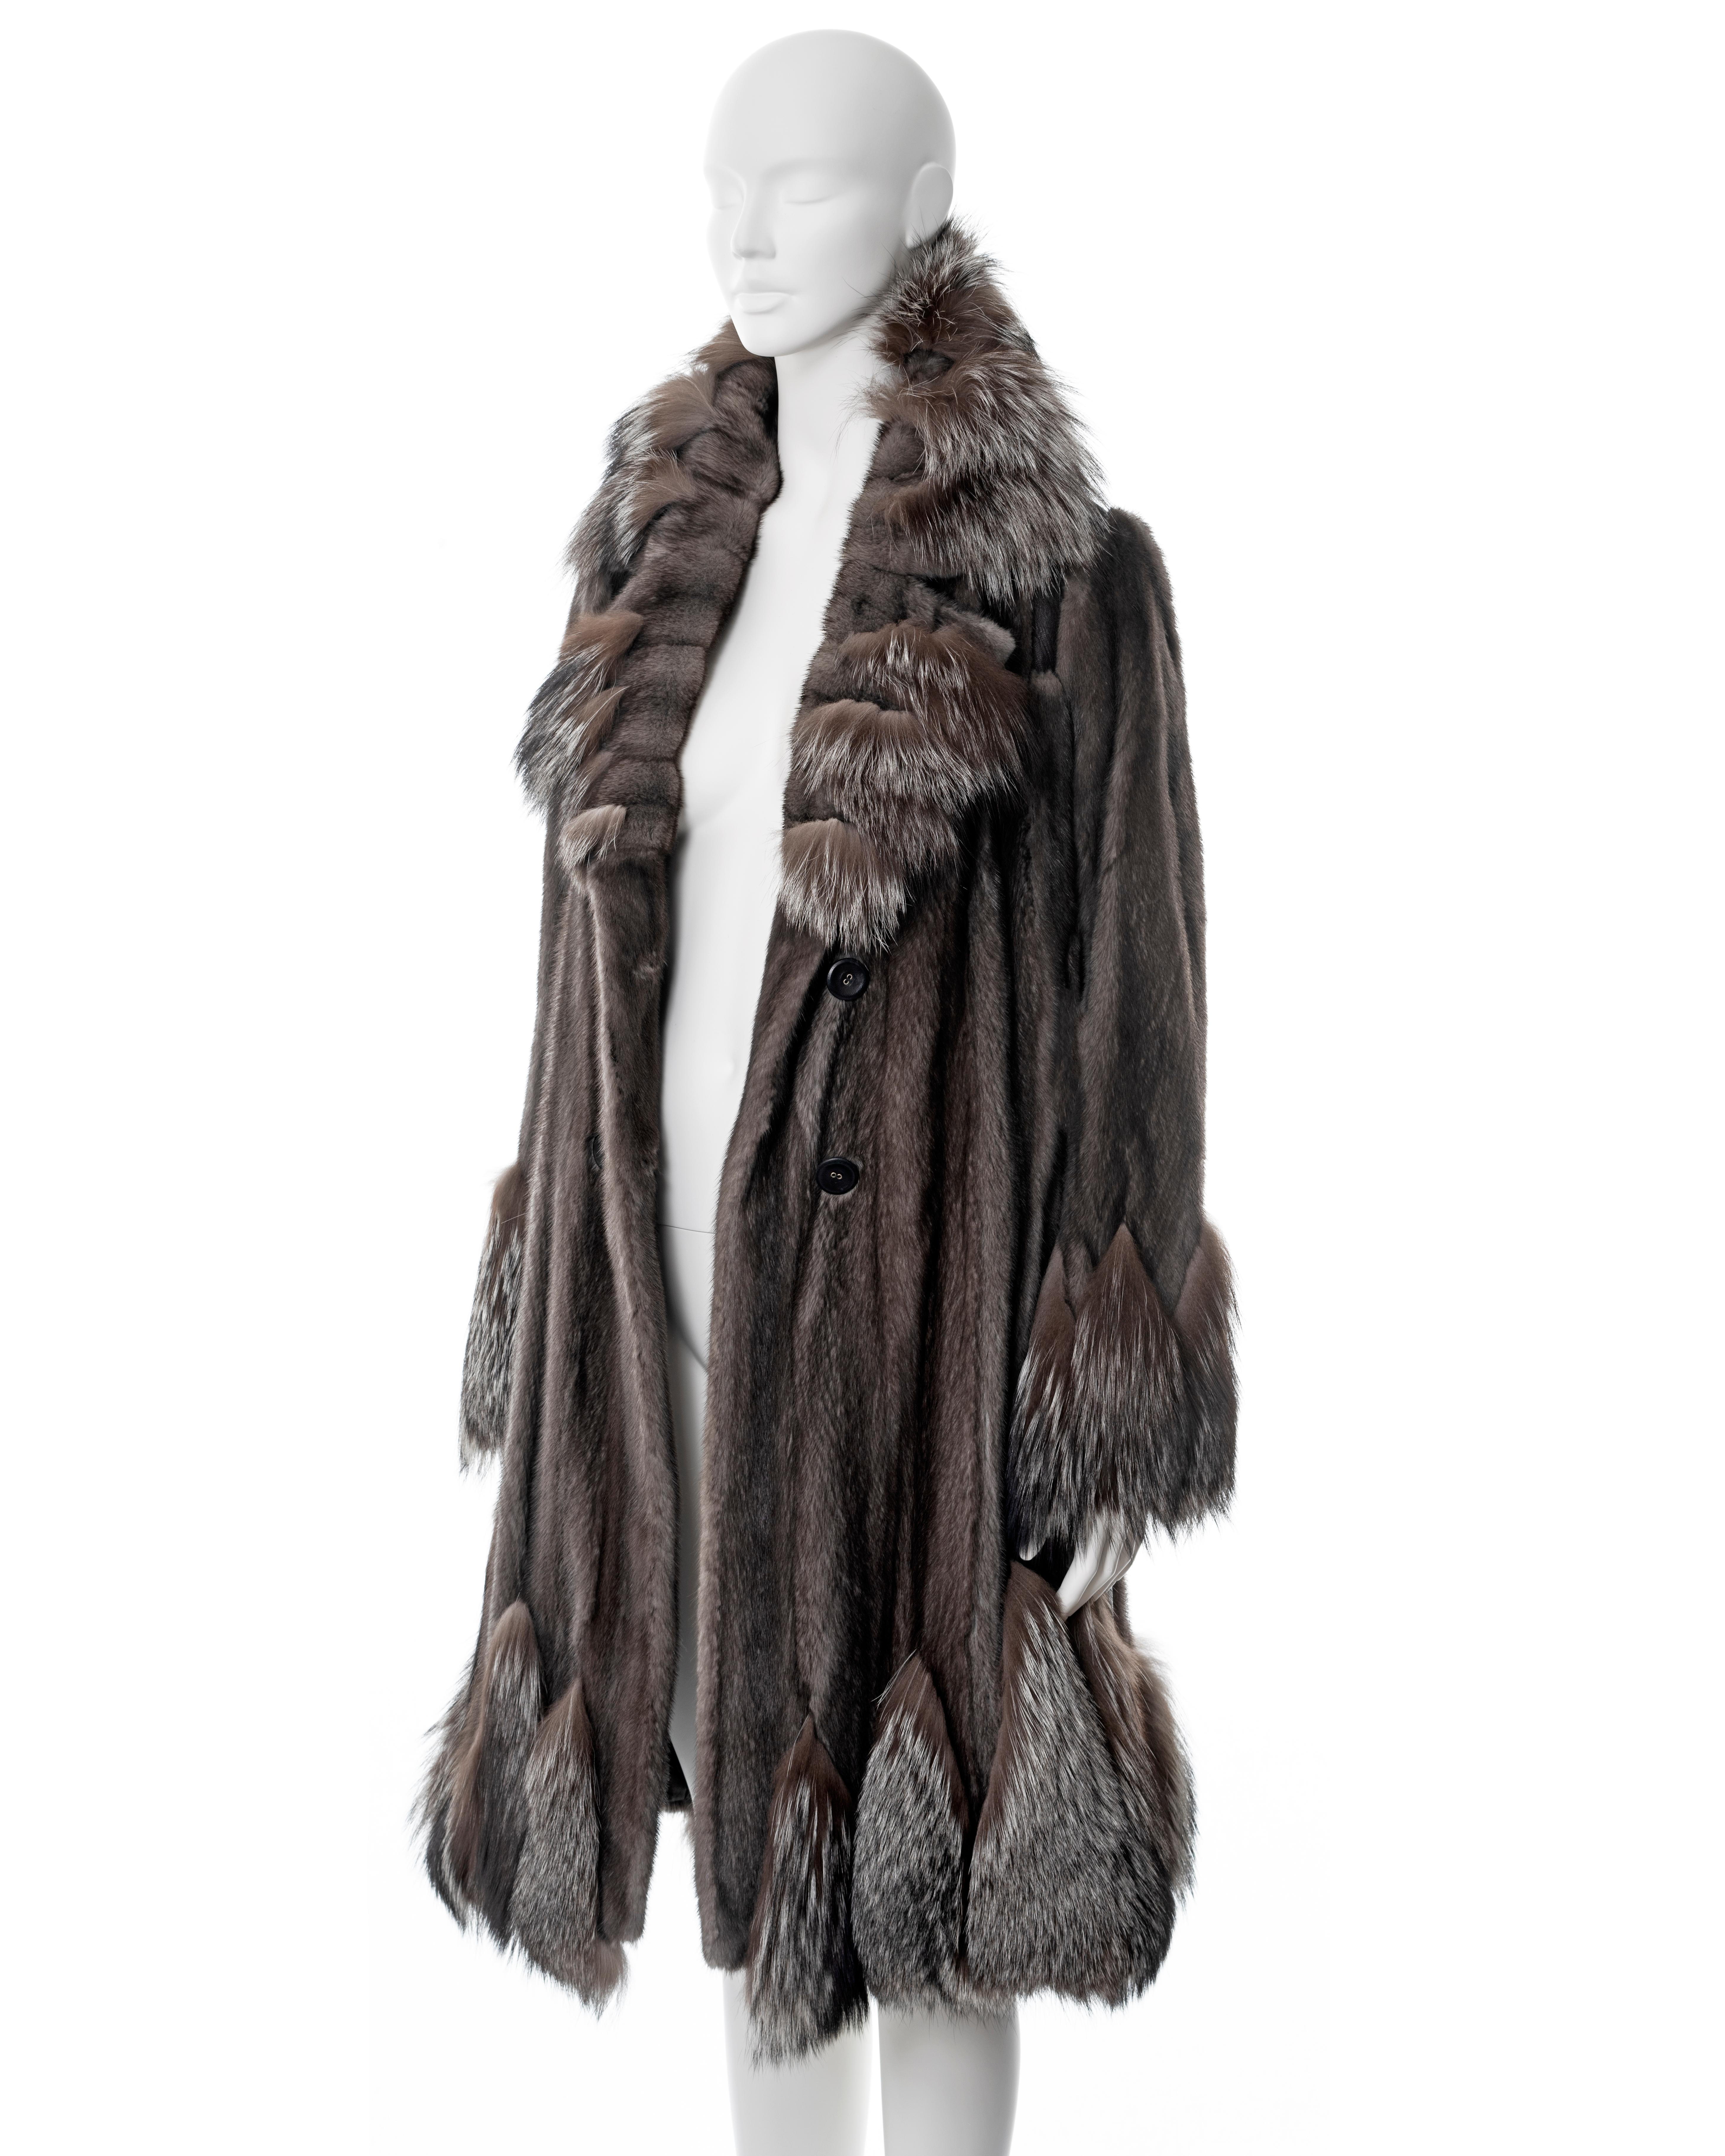 Women's Christian Dior by John Galliano silverblue mink and silver fox fur coat, fw 2006 For Sale